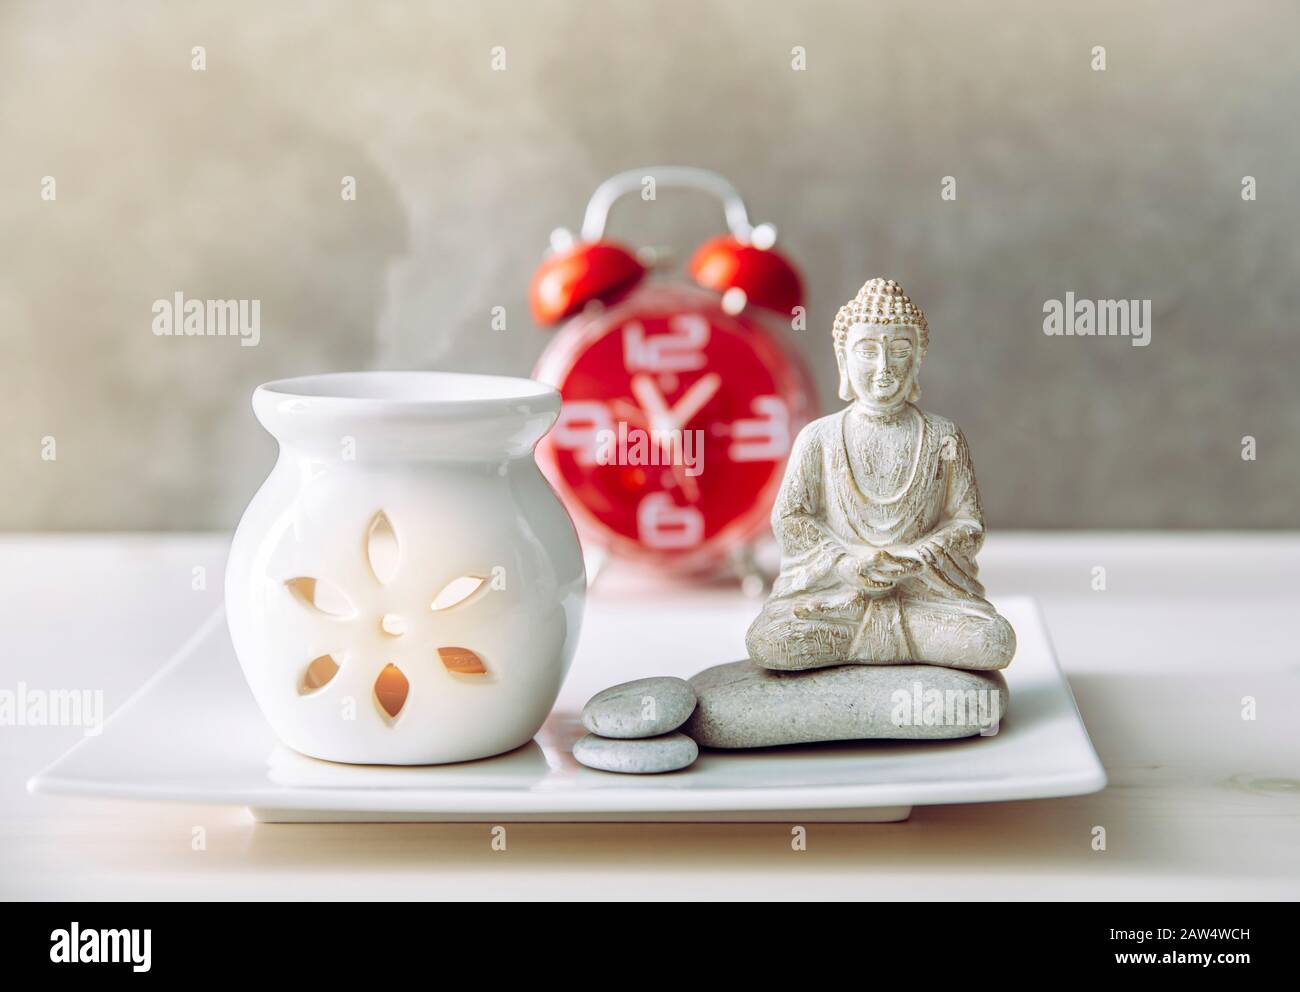 How to find balance between busy life and healthy mental health. Taking a break to sit and meditate concept. Buddha figure with aroma lamp and clock o Stock Photo